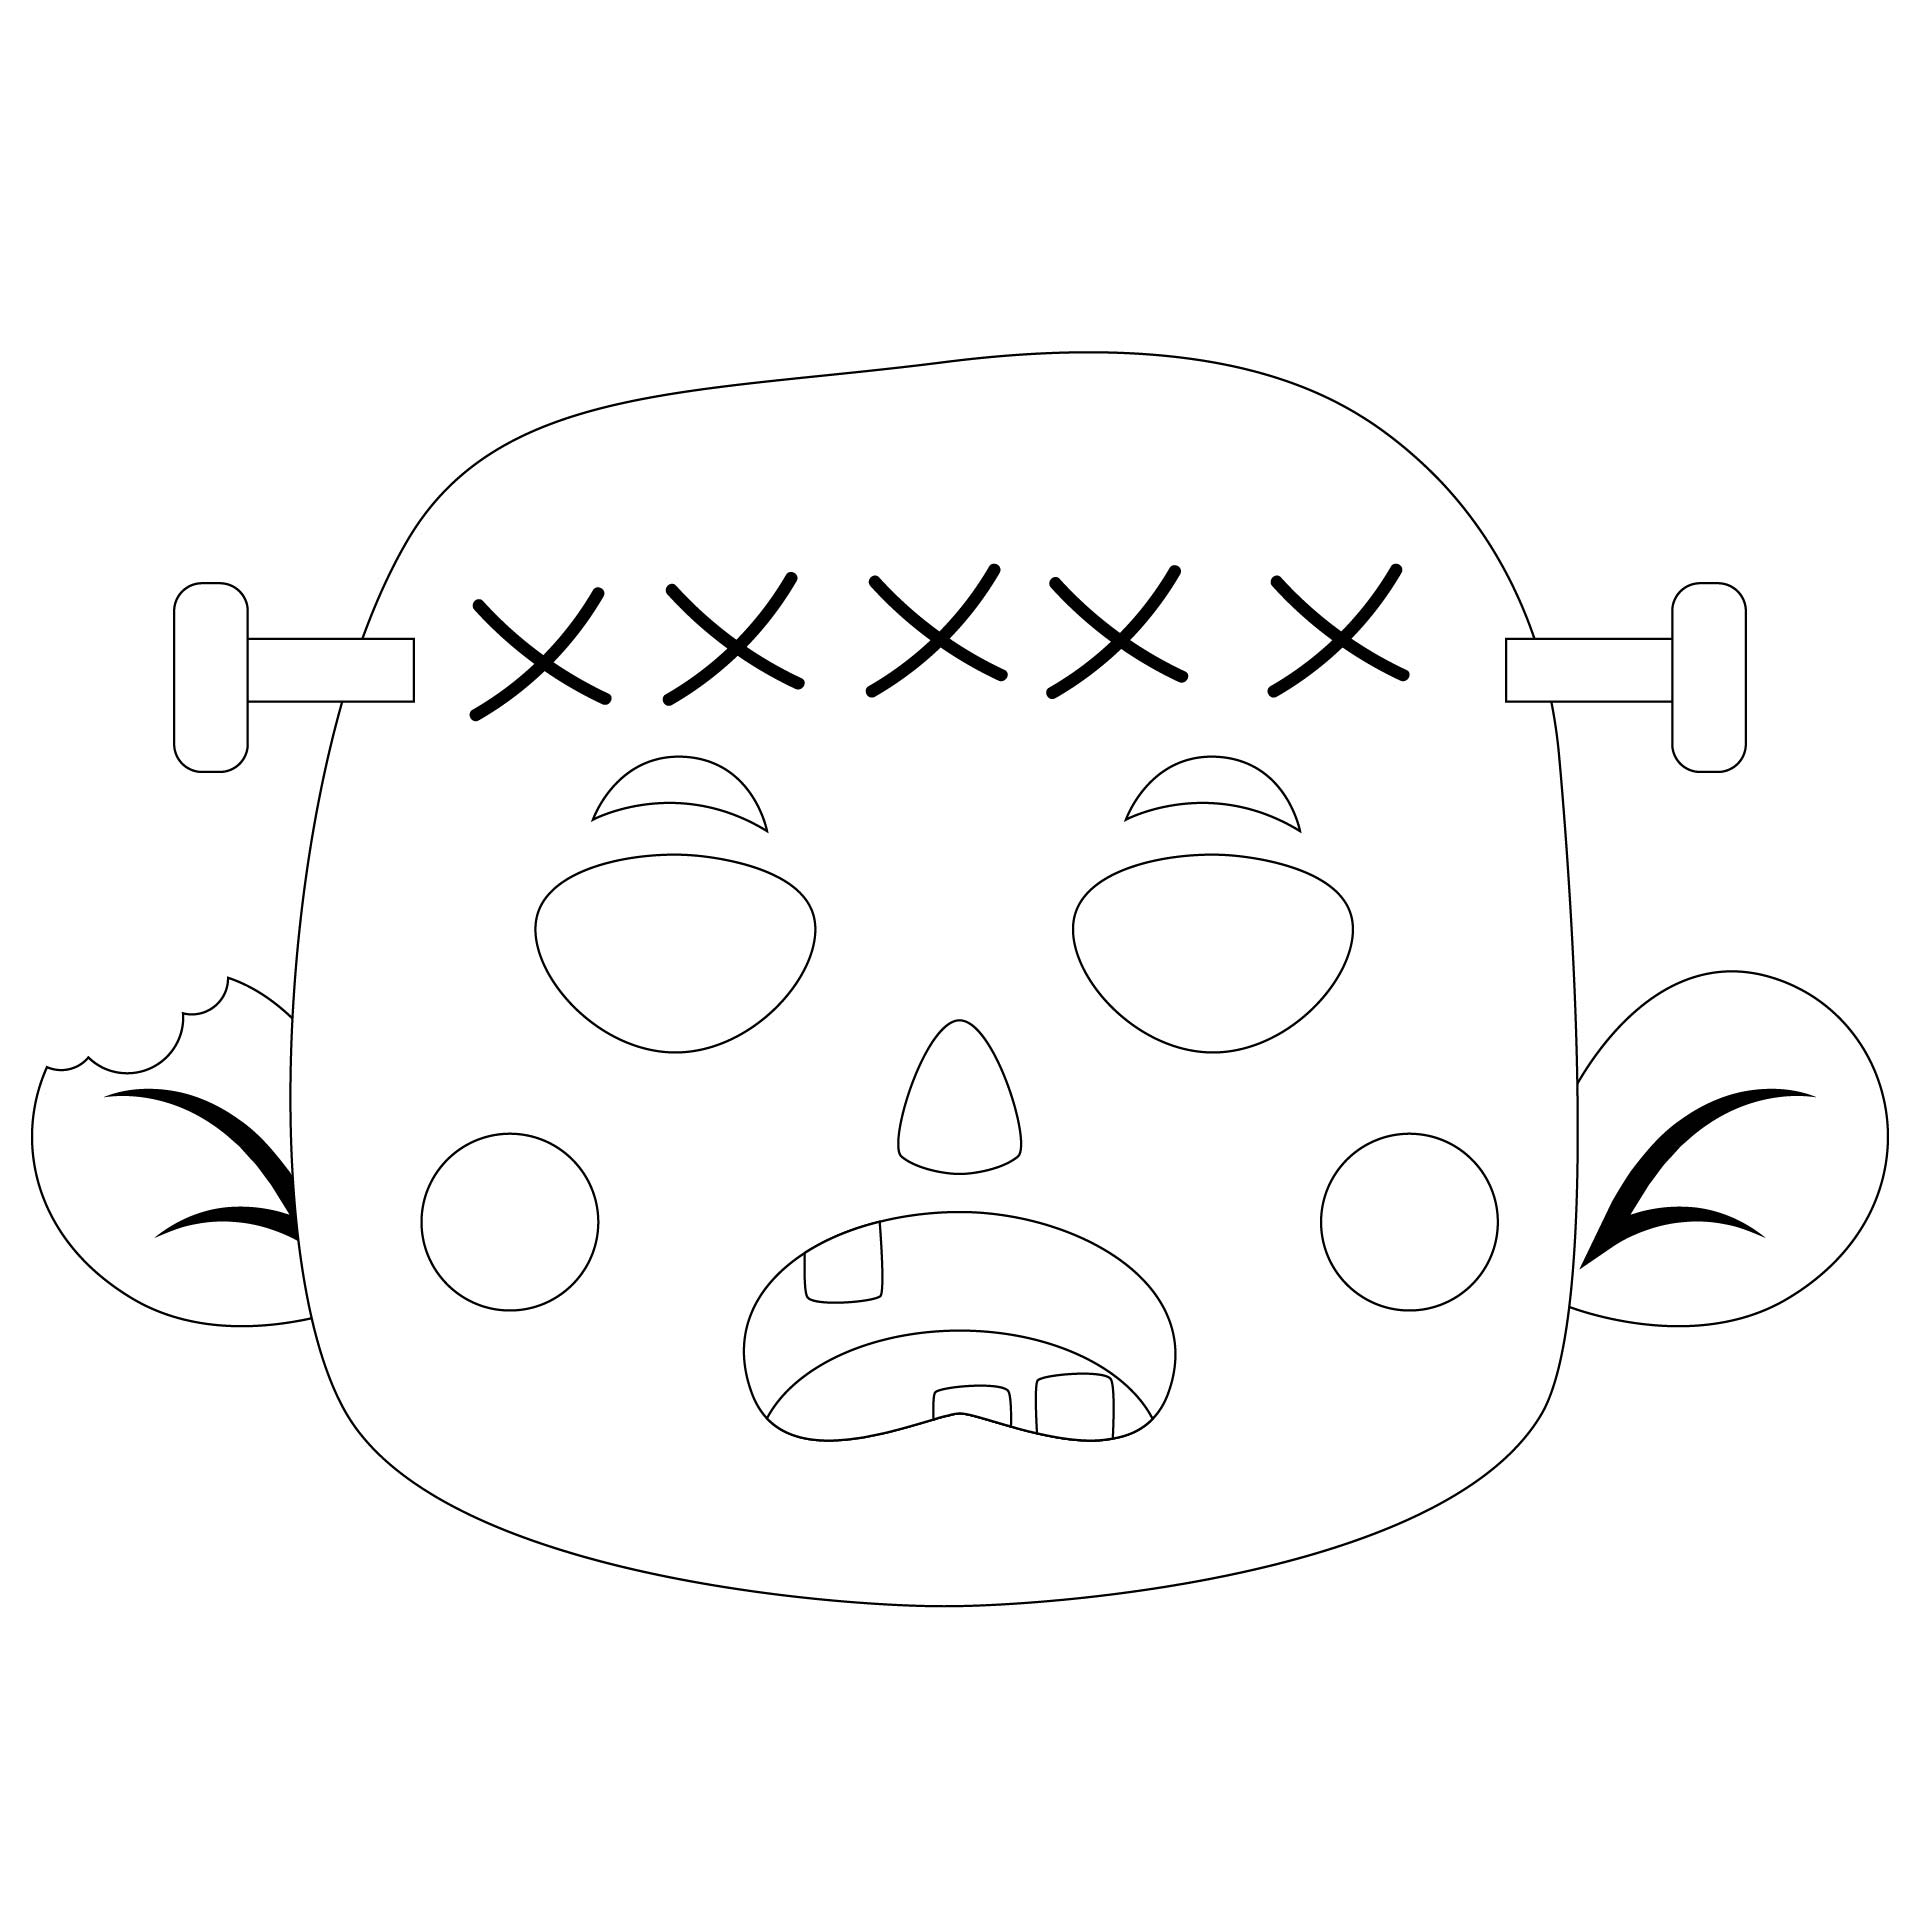 Frankenstein Halloween Mask Template Coloring Page Printable